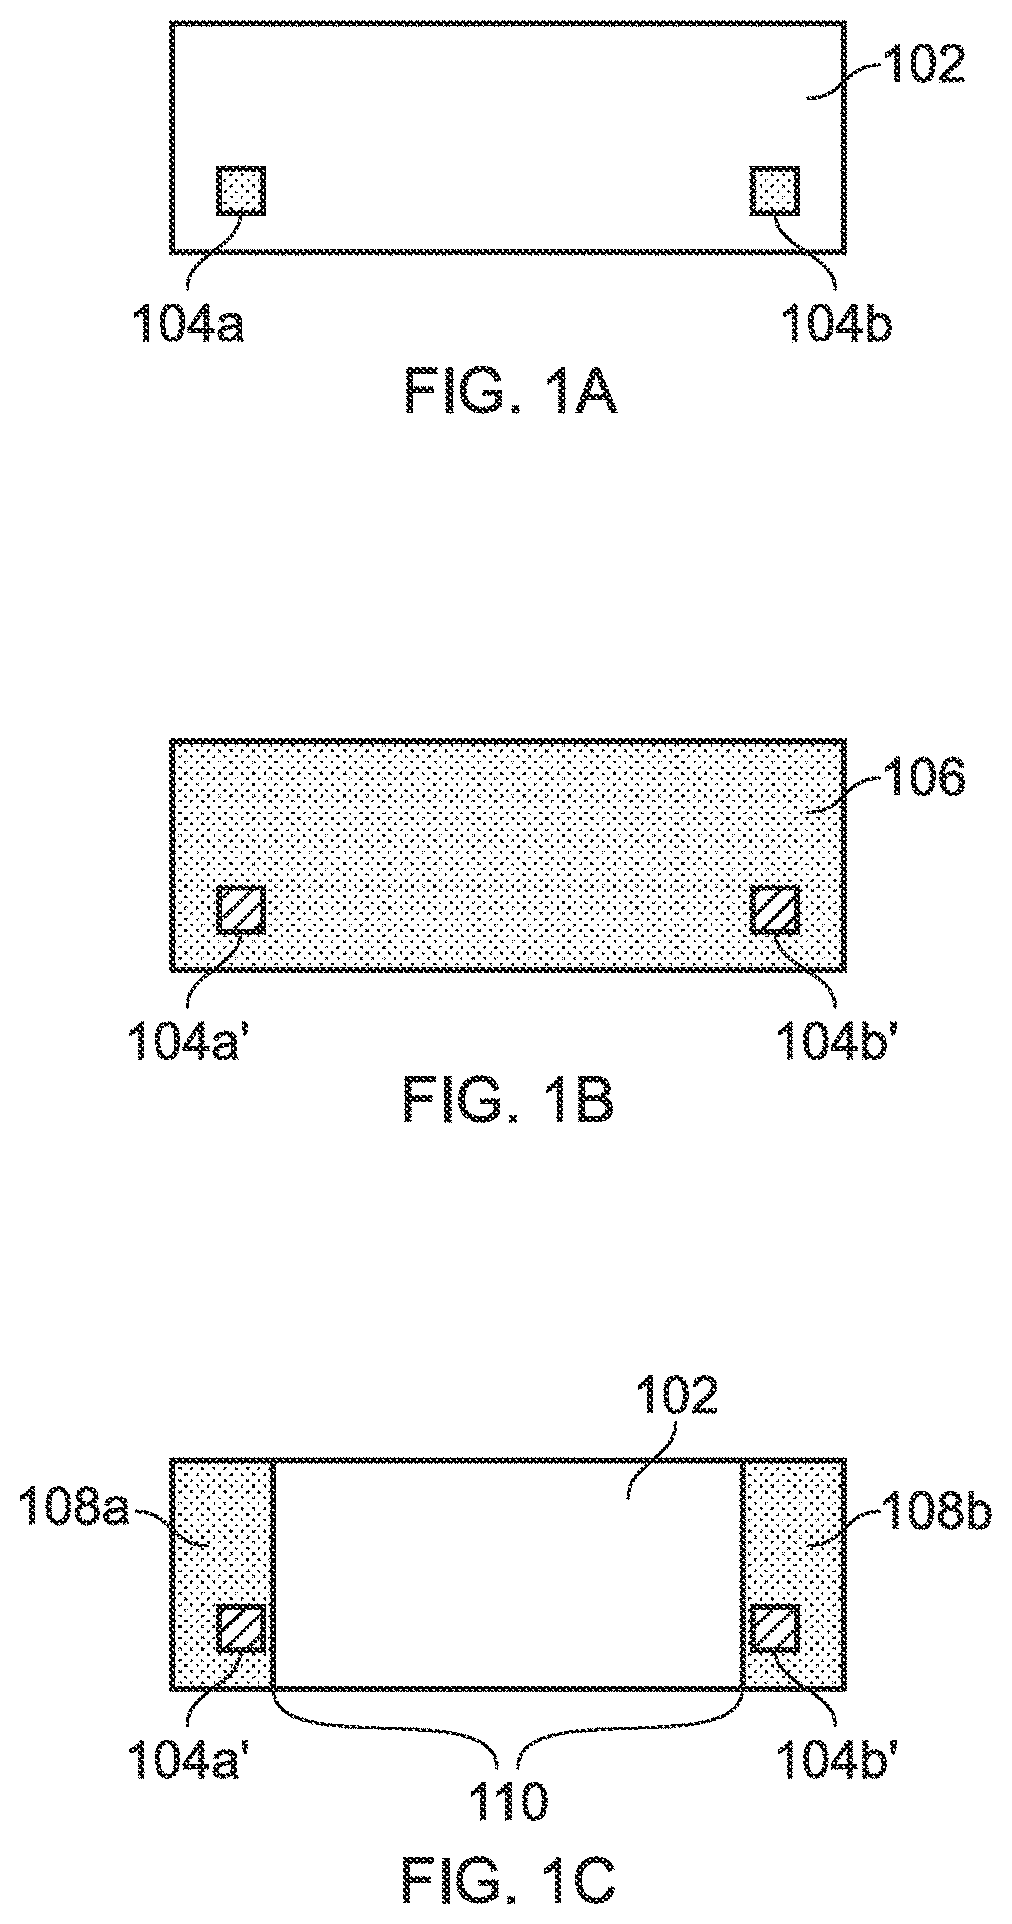 Method of fabricating a conductive layer on an IC using non-lithographic fabrication techniques